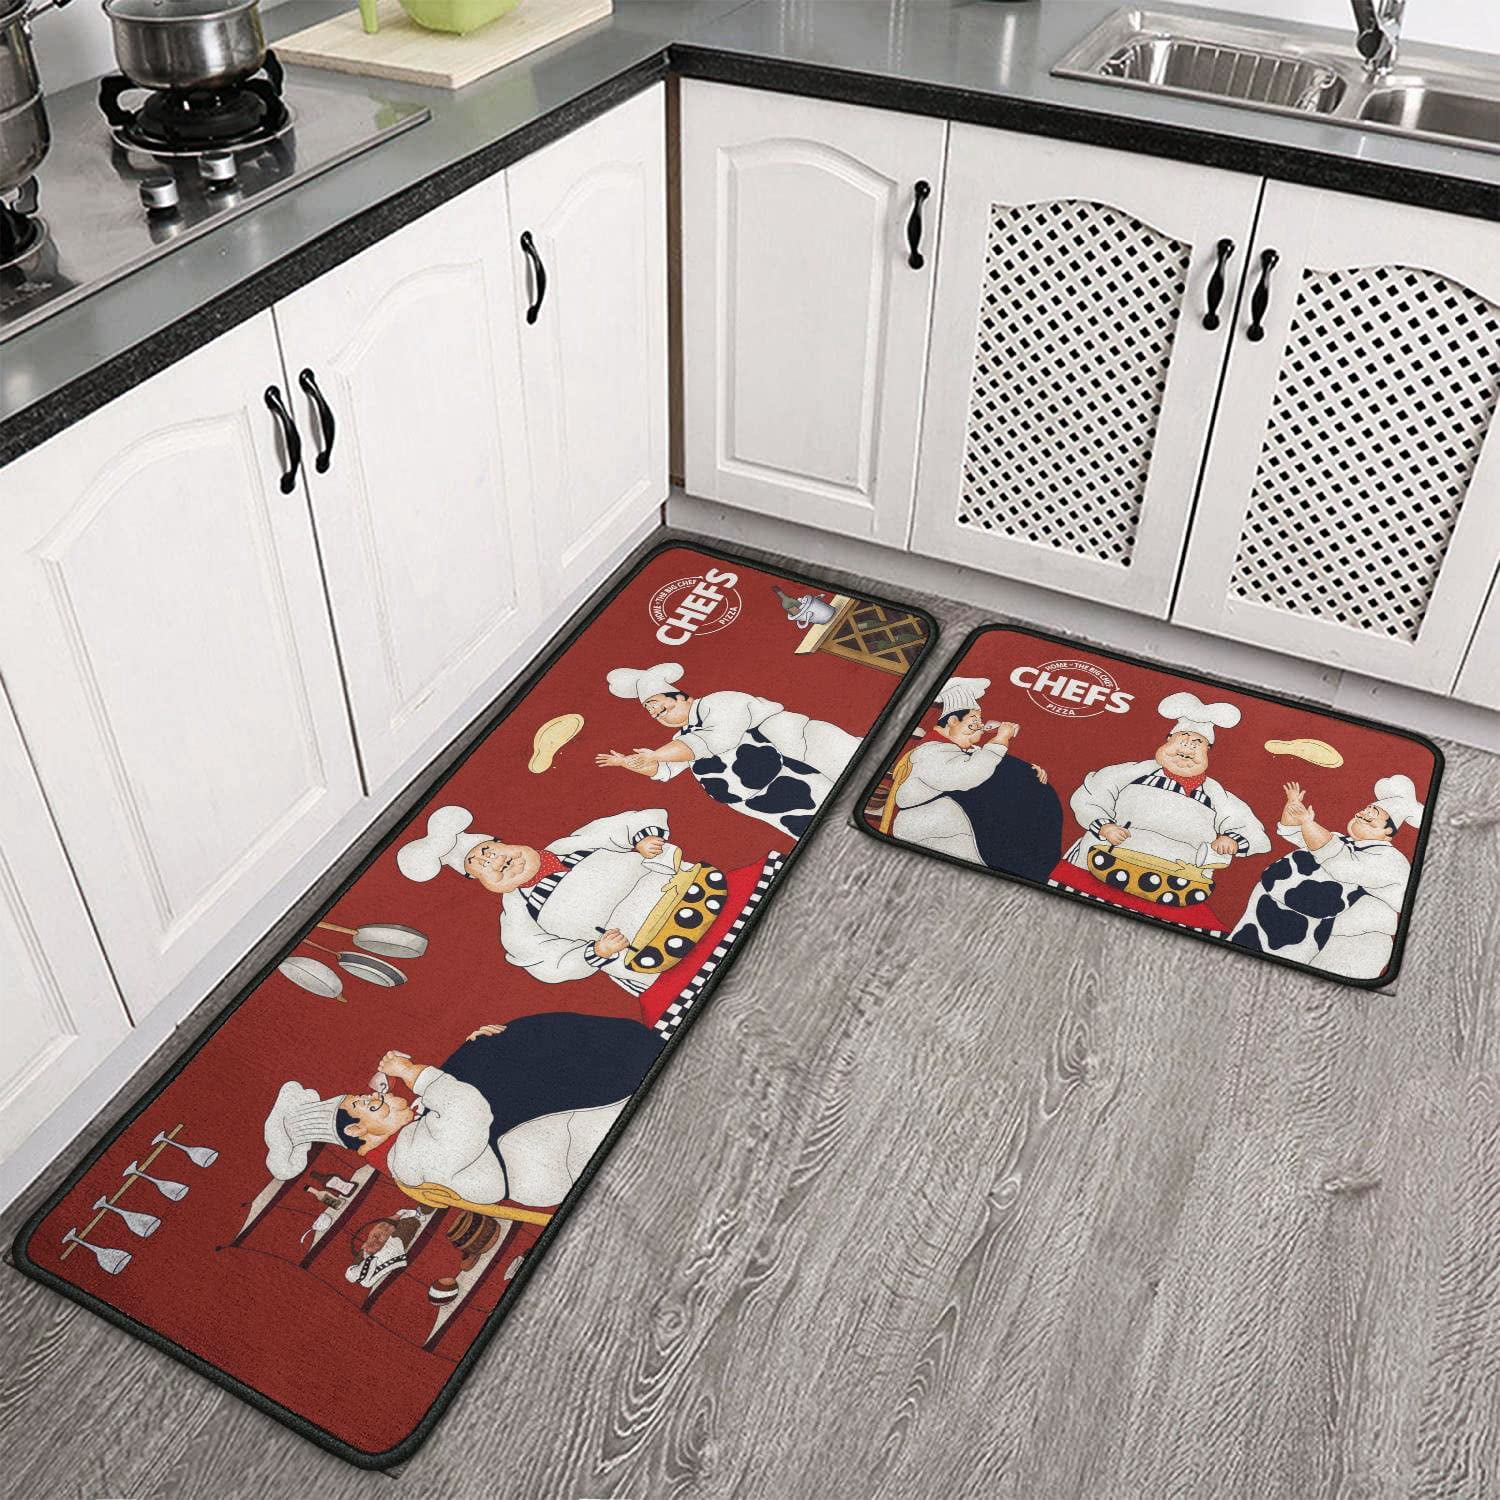 Gwnnb Kitchen Rug Set Fat Chef Kitchen Art Waiters Cooks Kitchen Rugs and  Mats Microfiber PVC Back Non-Slip Soft Area Rug for Floor, Doormat Set (47